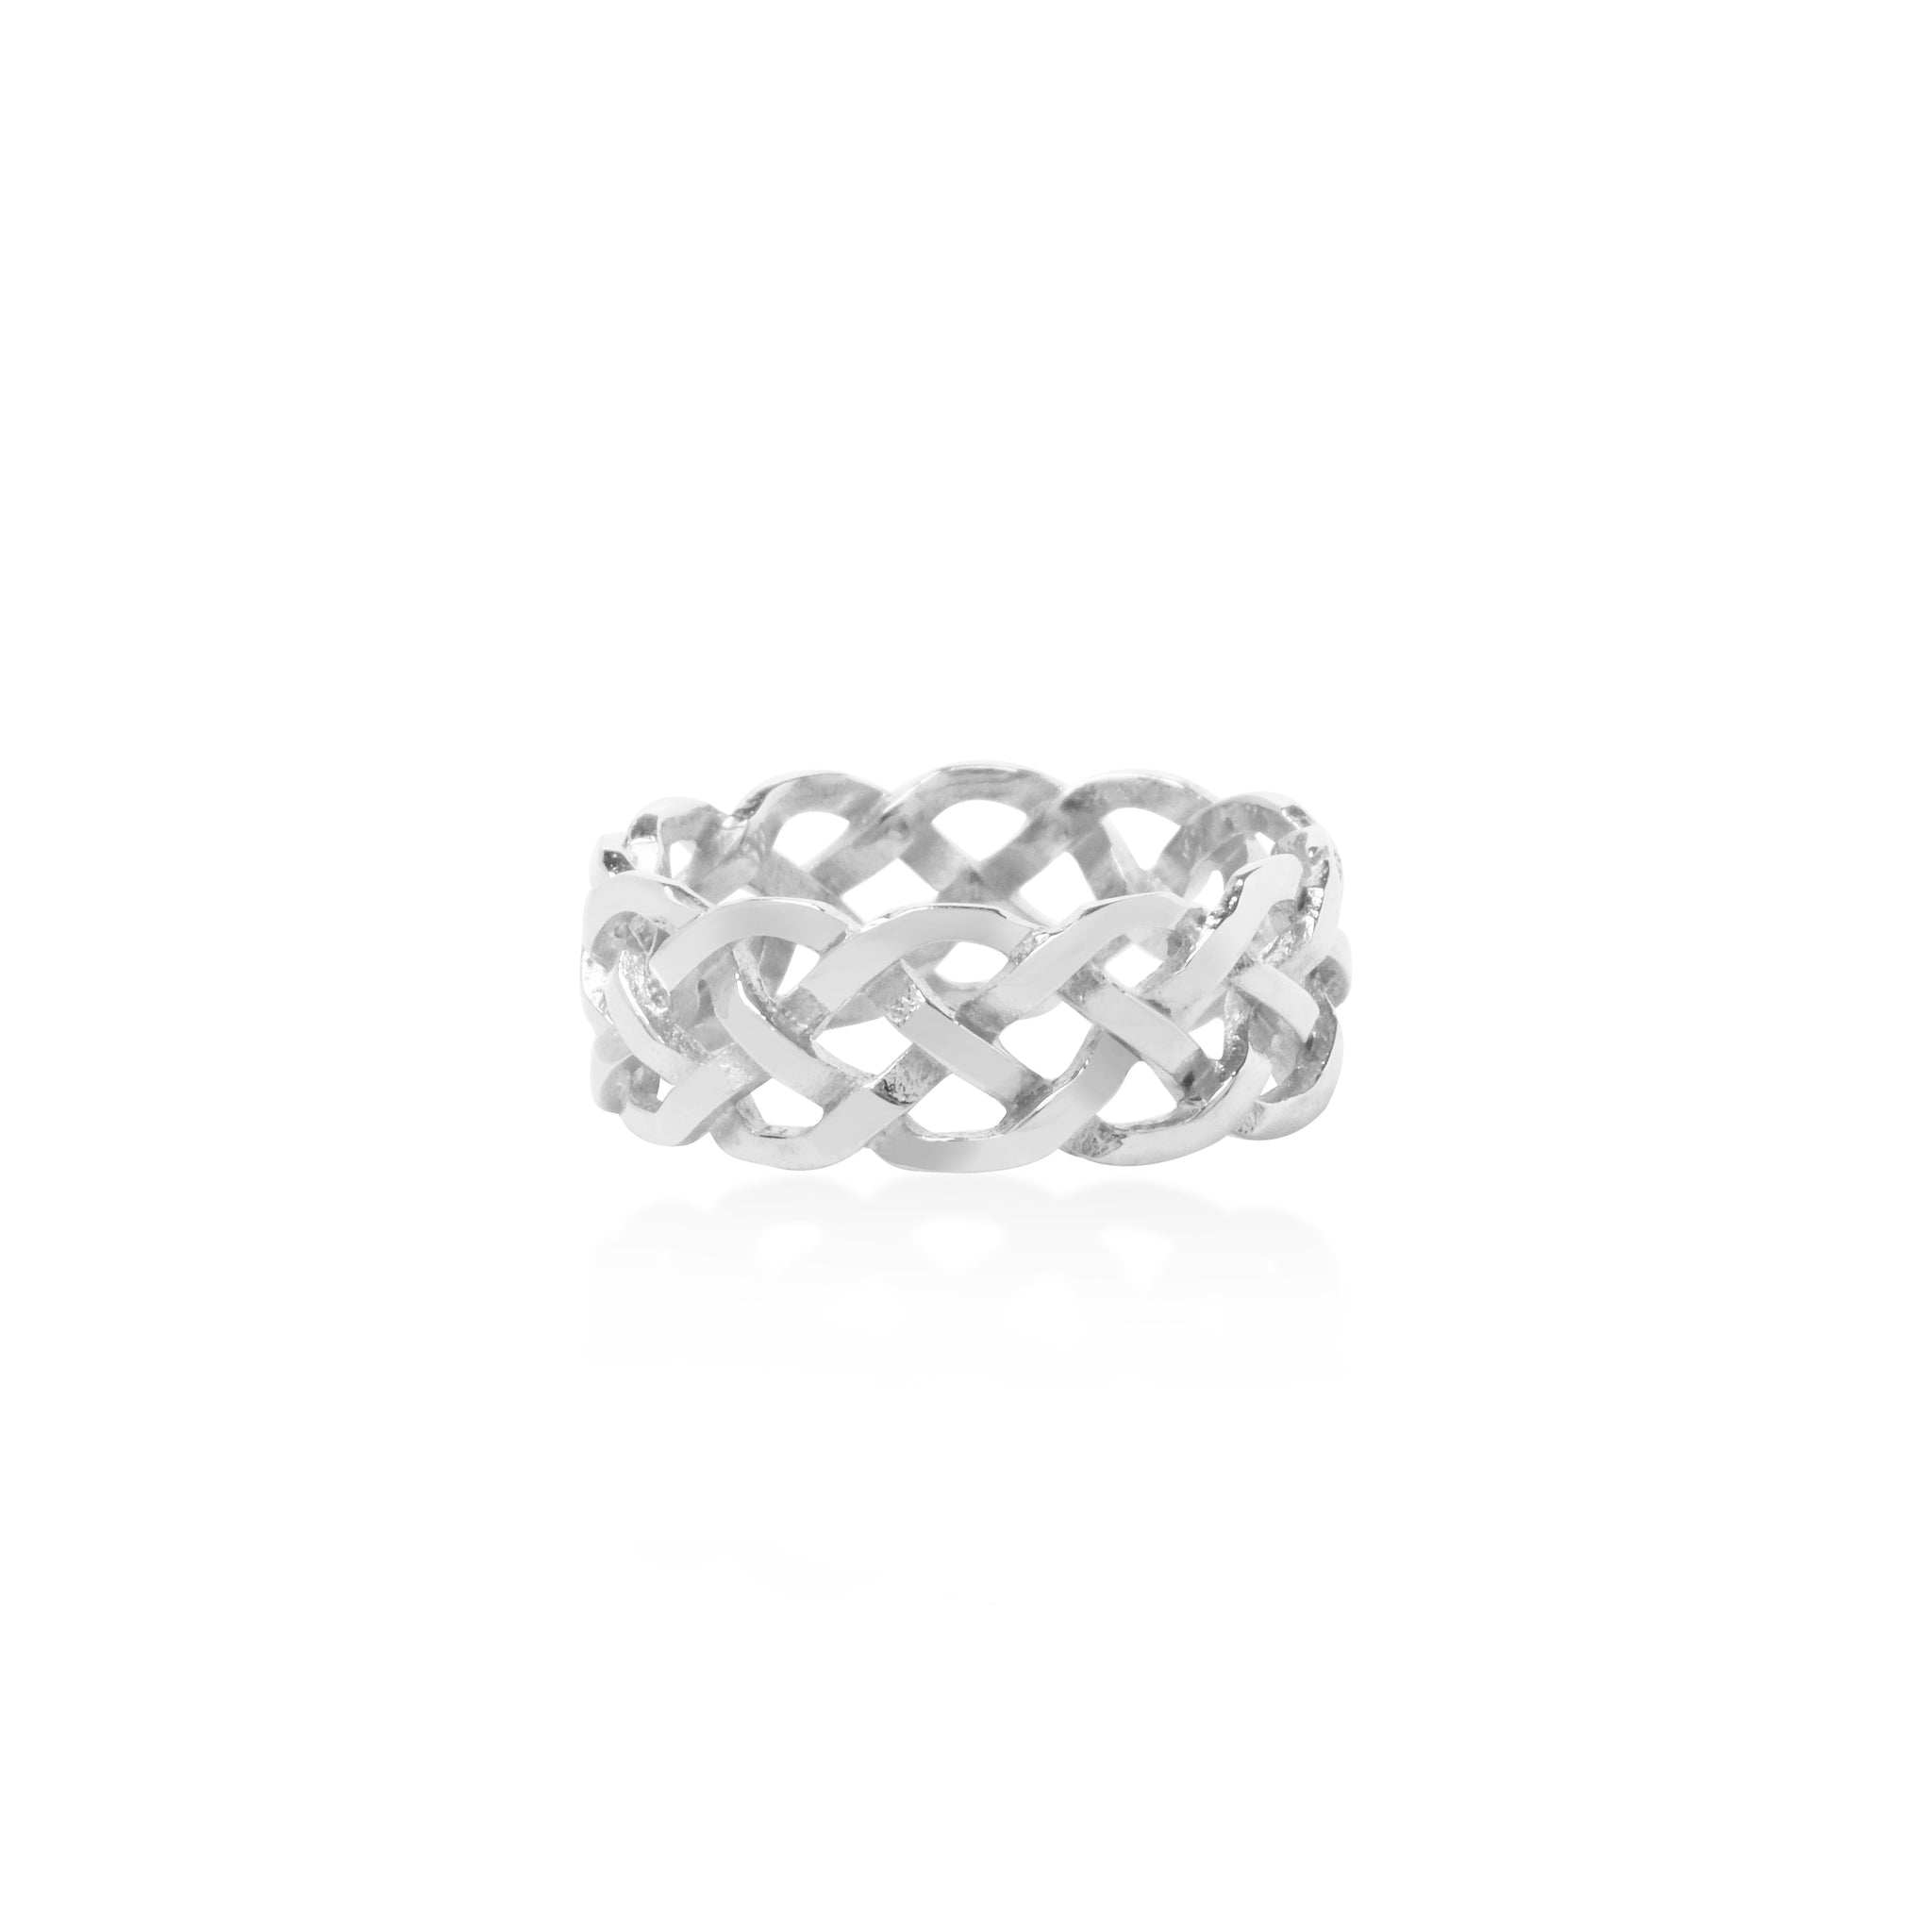 Woven Medium Band Ring in 925 Sterling Silver